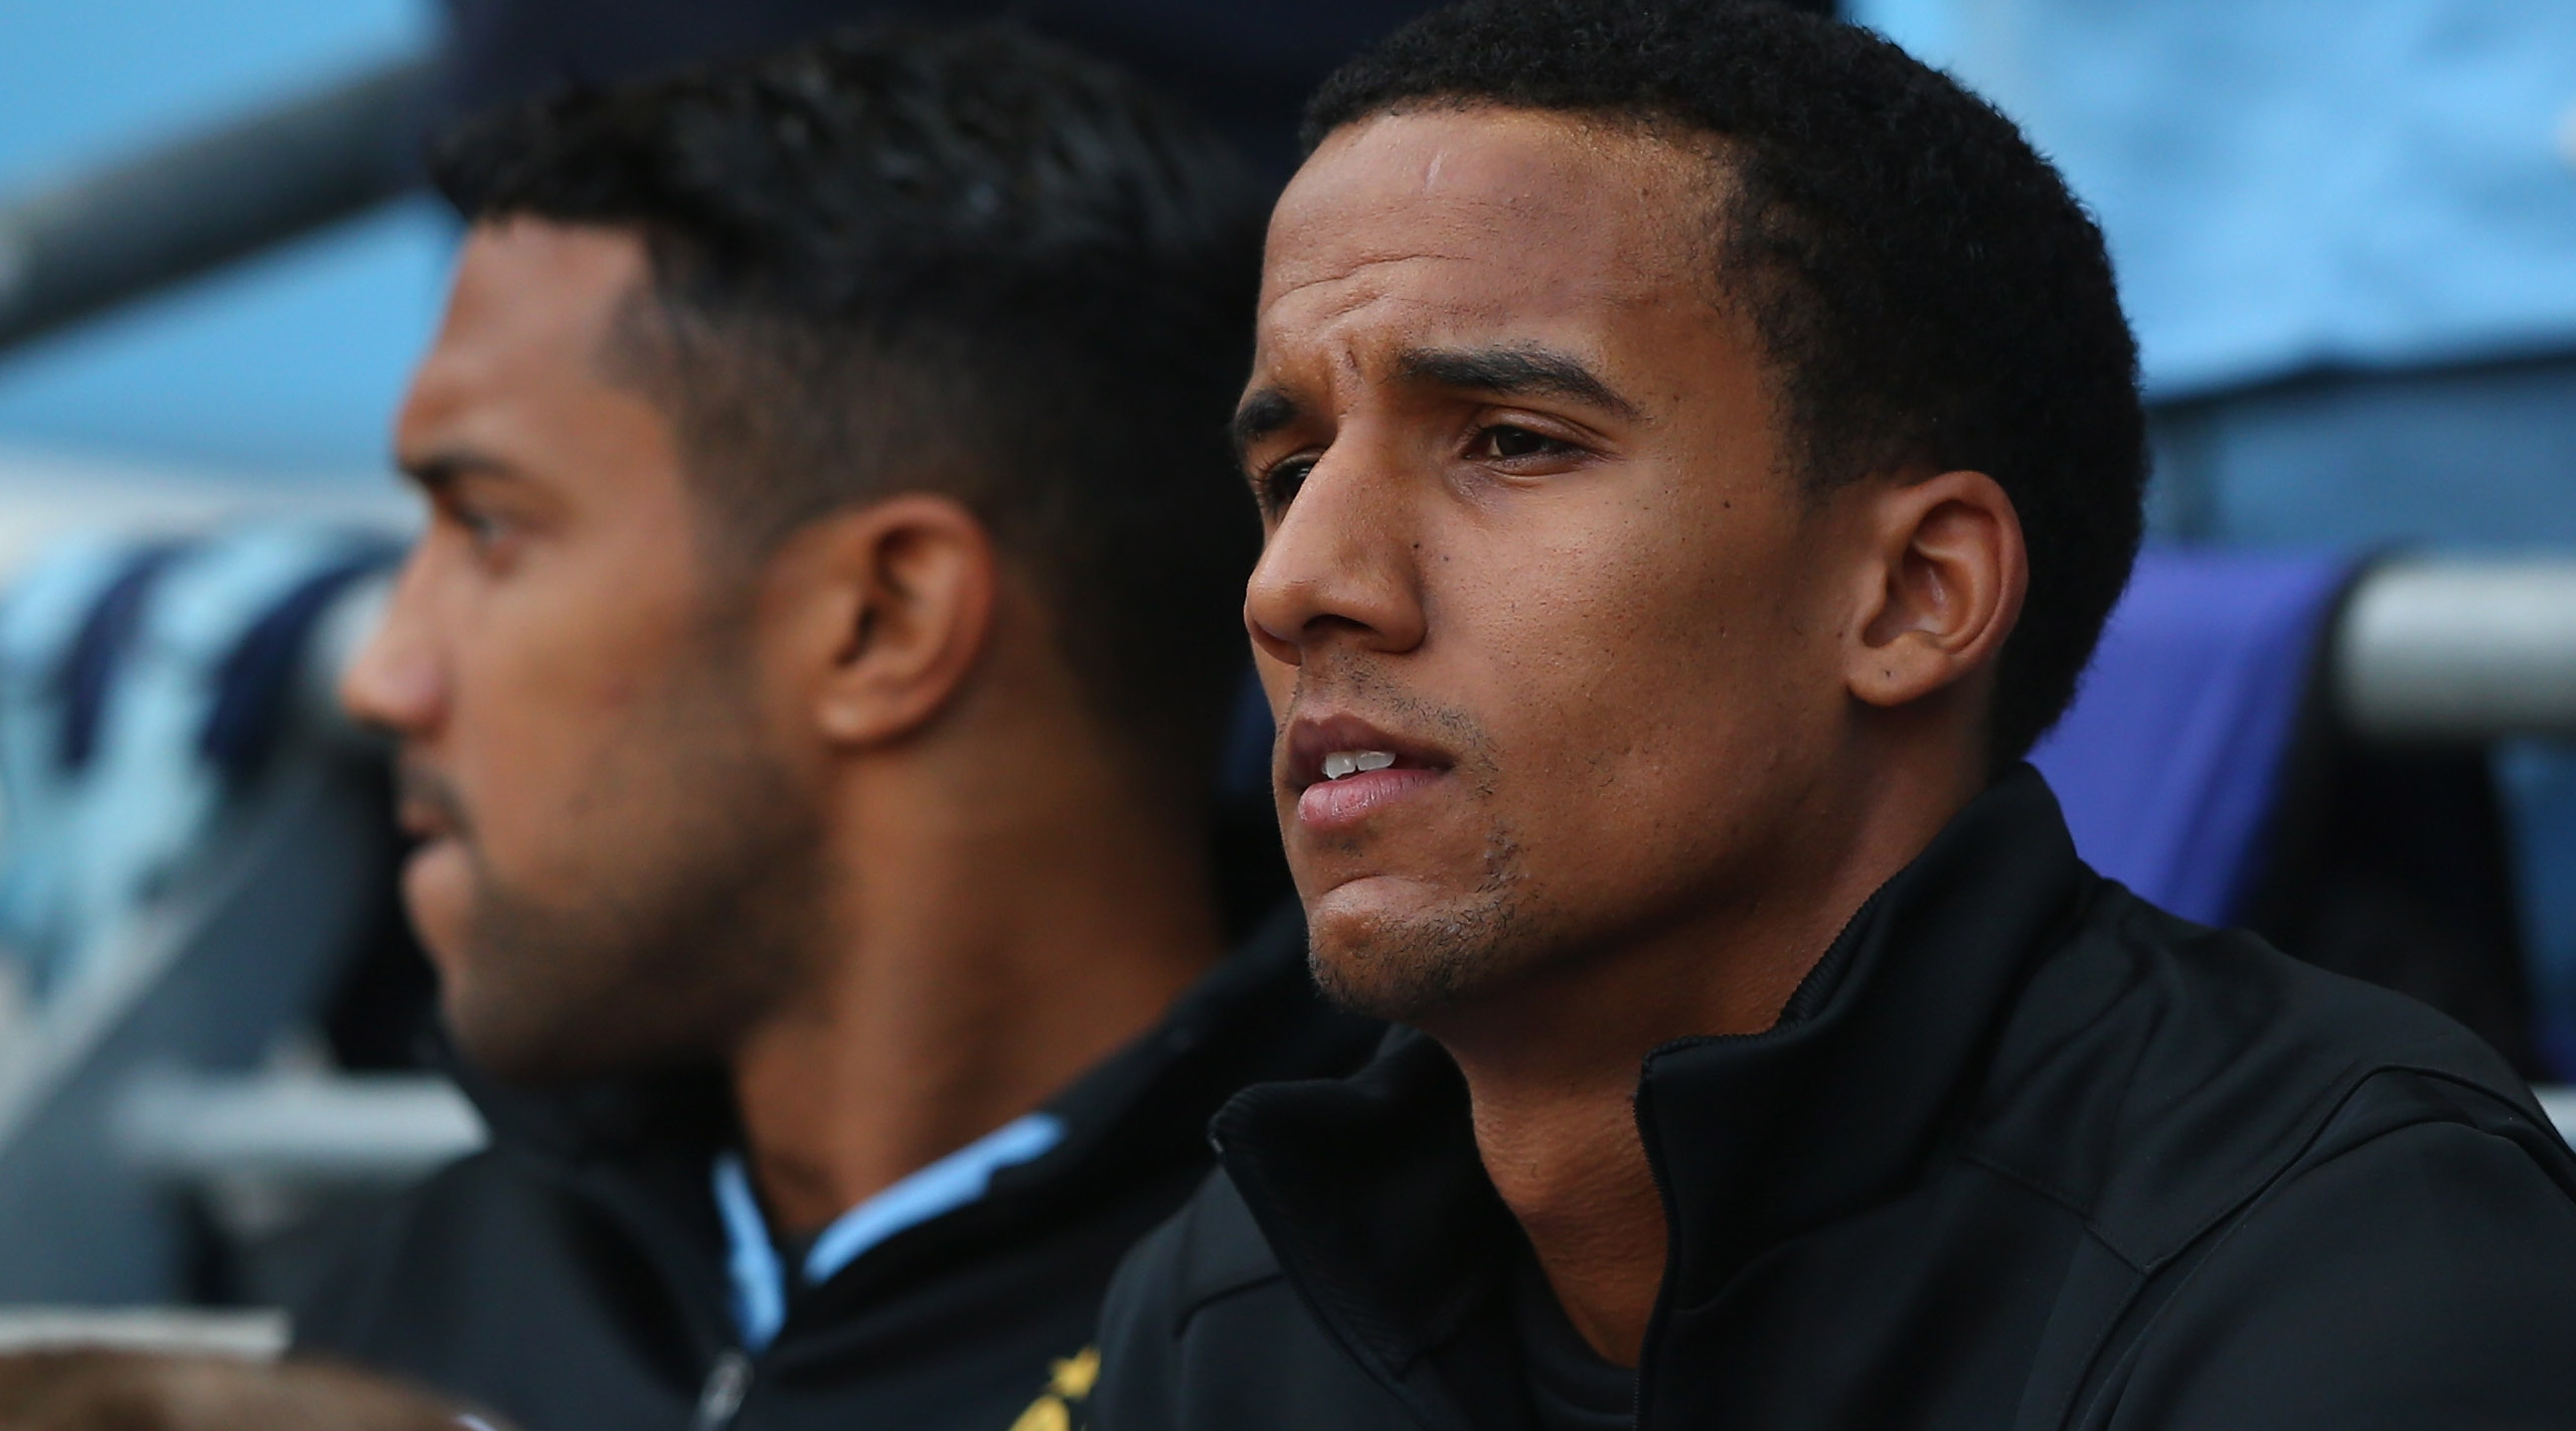 MANCHESTER, ENGLAND - SEPTEMBER 01: New signing Scott Sinclair of Manchester City watches from the bench during the Barclays Premier League match between Manchester City and Queens Park Rangers at Etihad Stadium on September 1, 2012 in Manchester, England. (Photo by Alex Livesey/Getty Images)